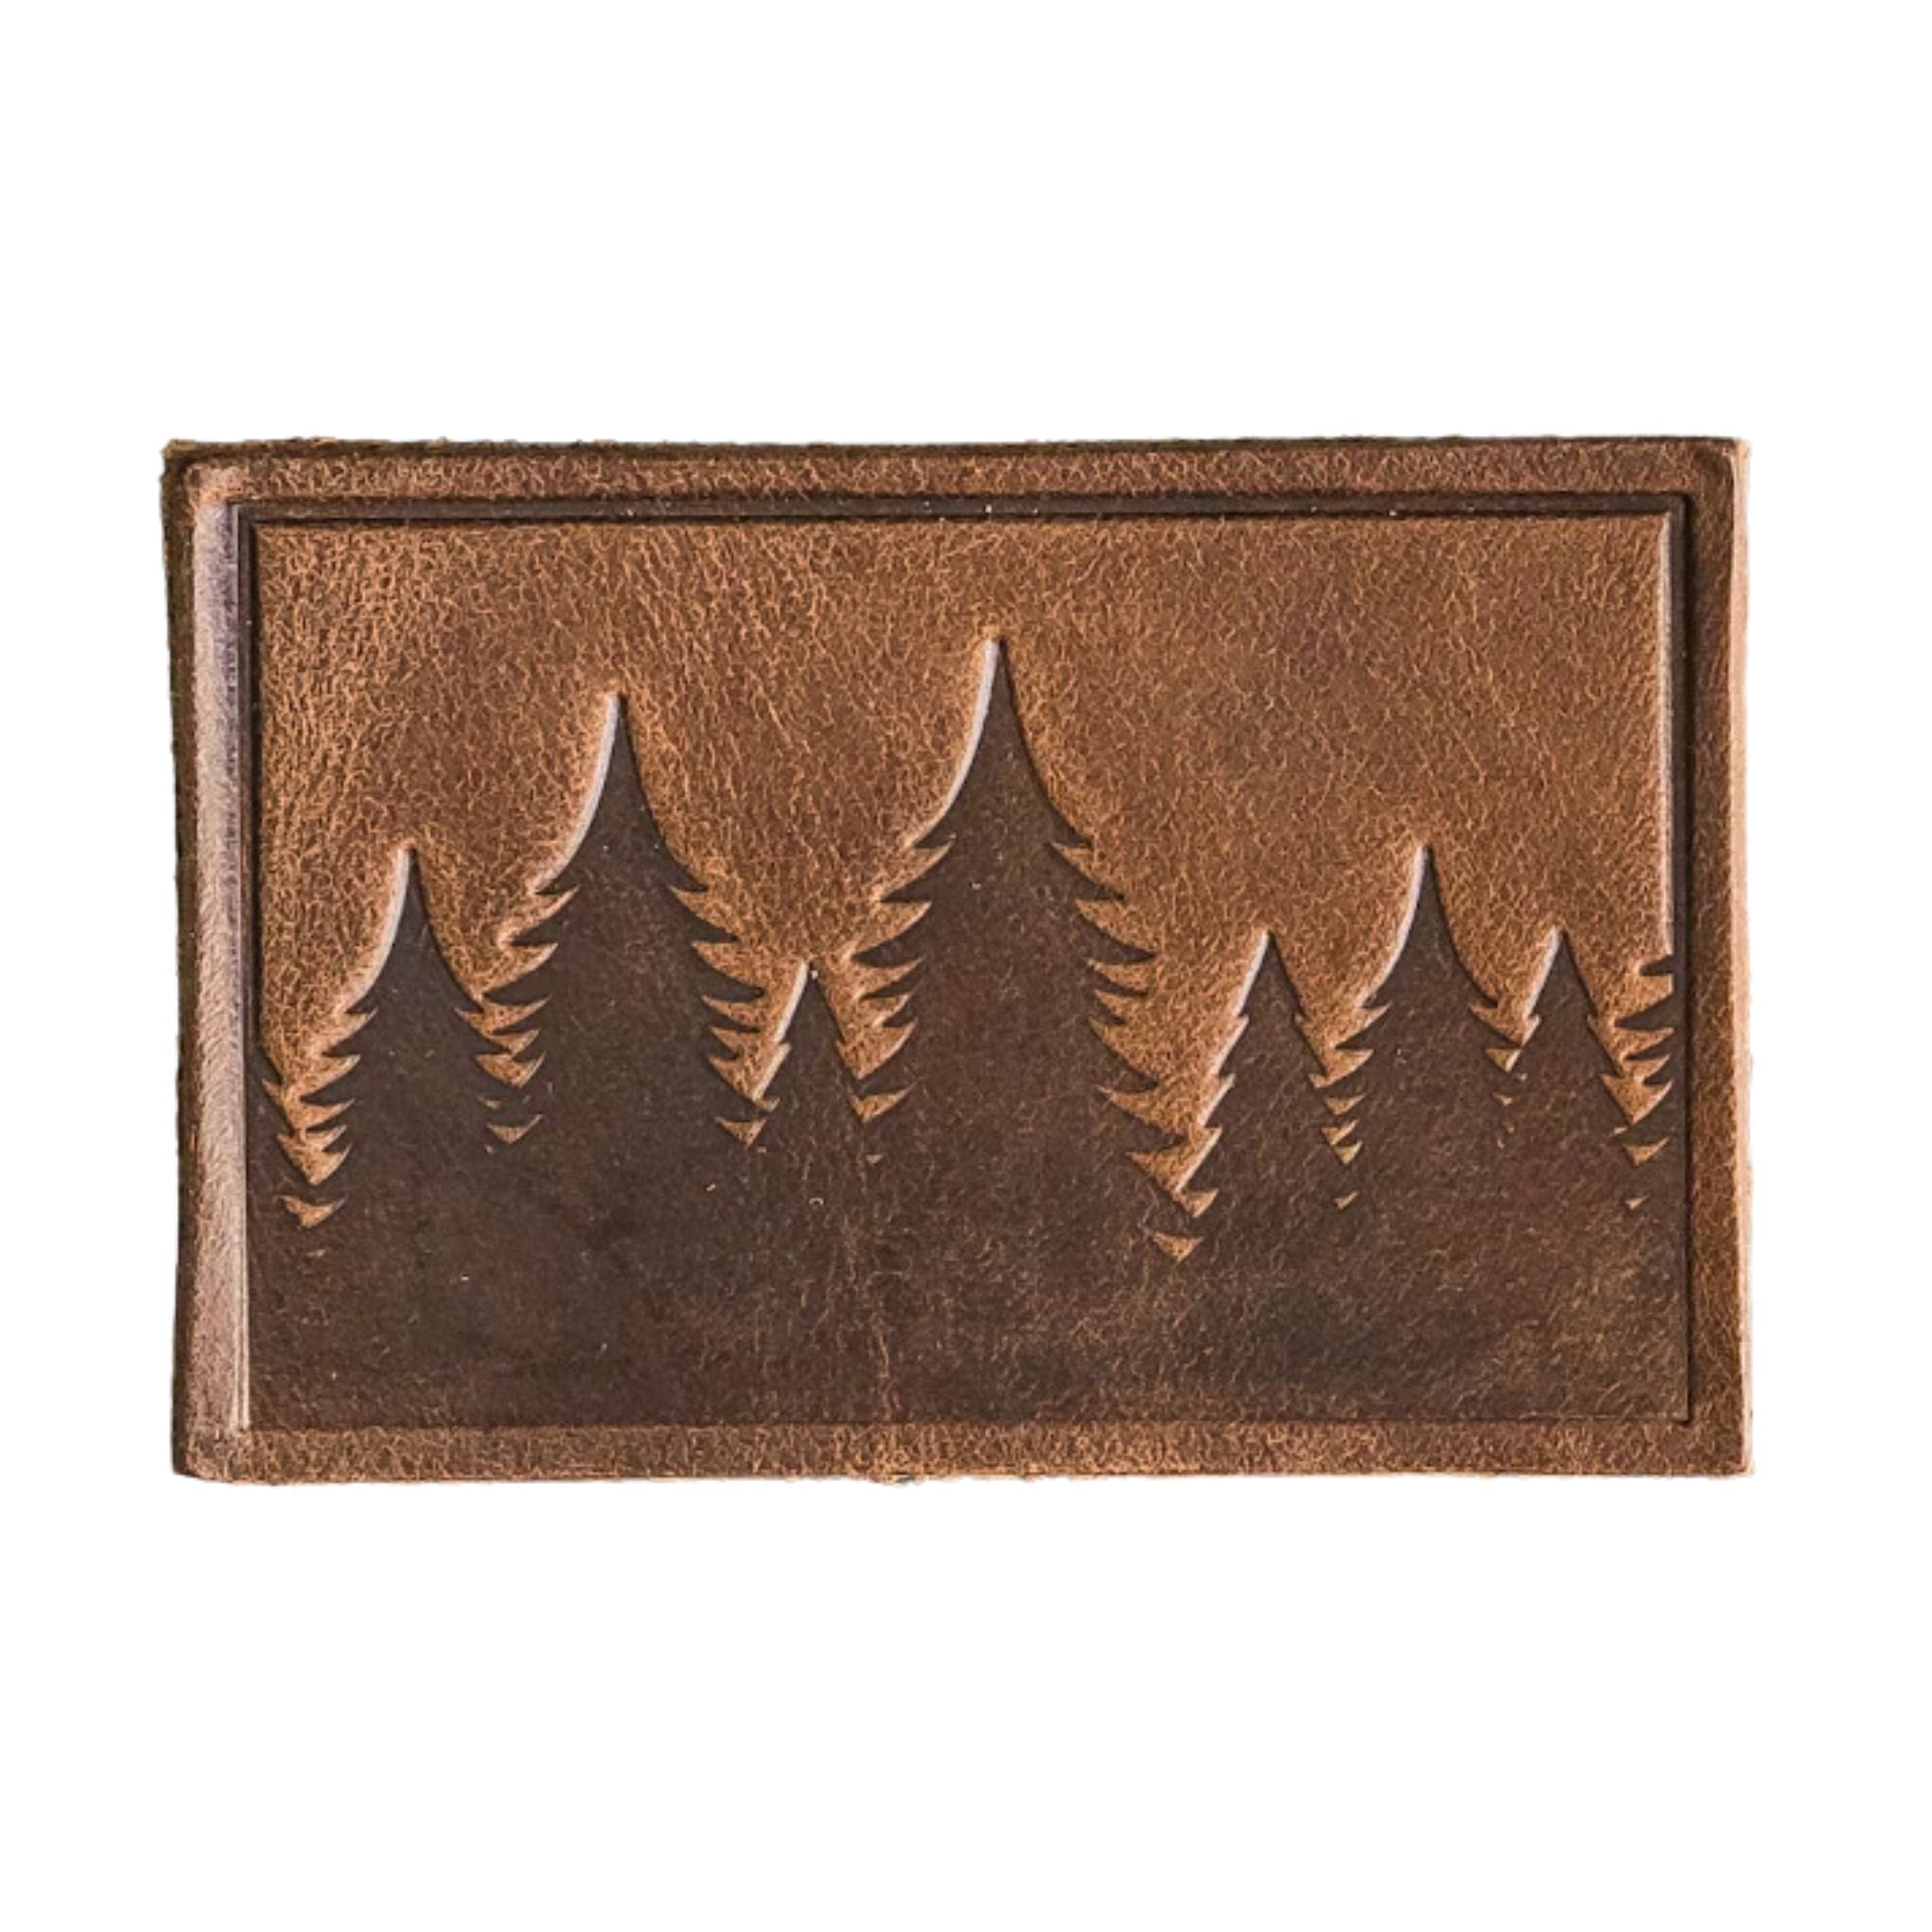 Pine Tree Leather Patch Velcro Option 3 X 2 Rectangle Tree Ridgeline Hiking  Patch for Backpacks Valentine's Day Gift 